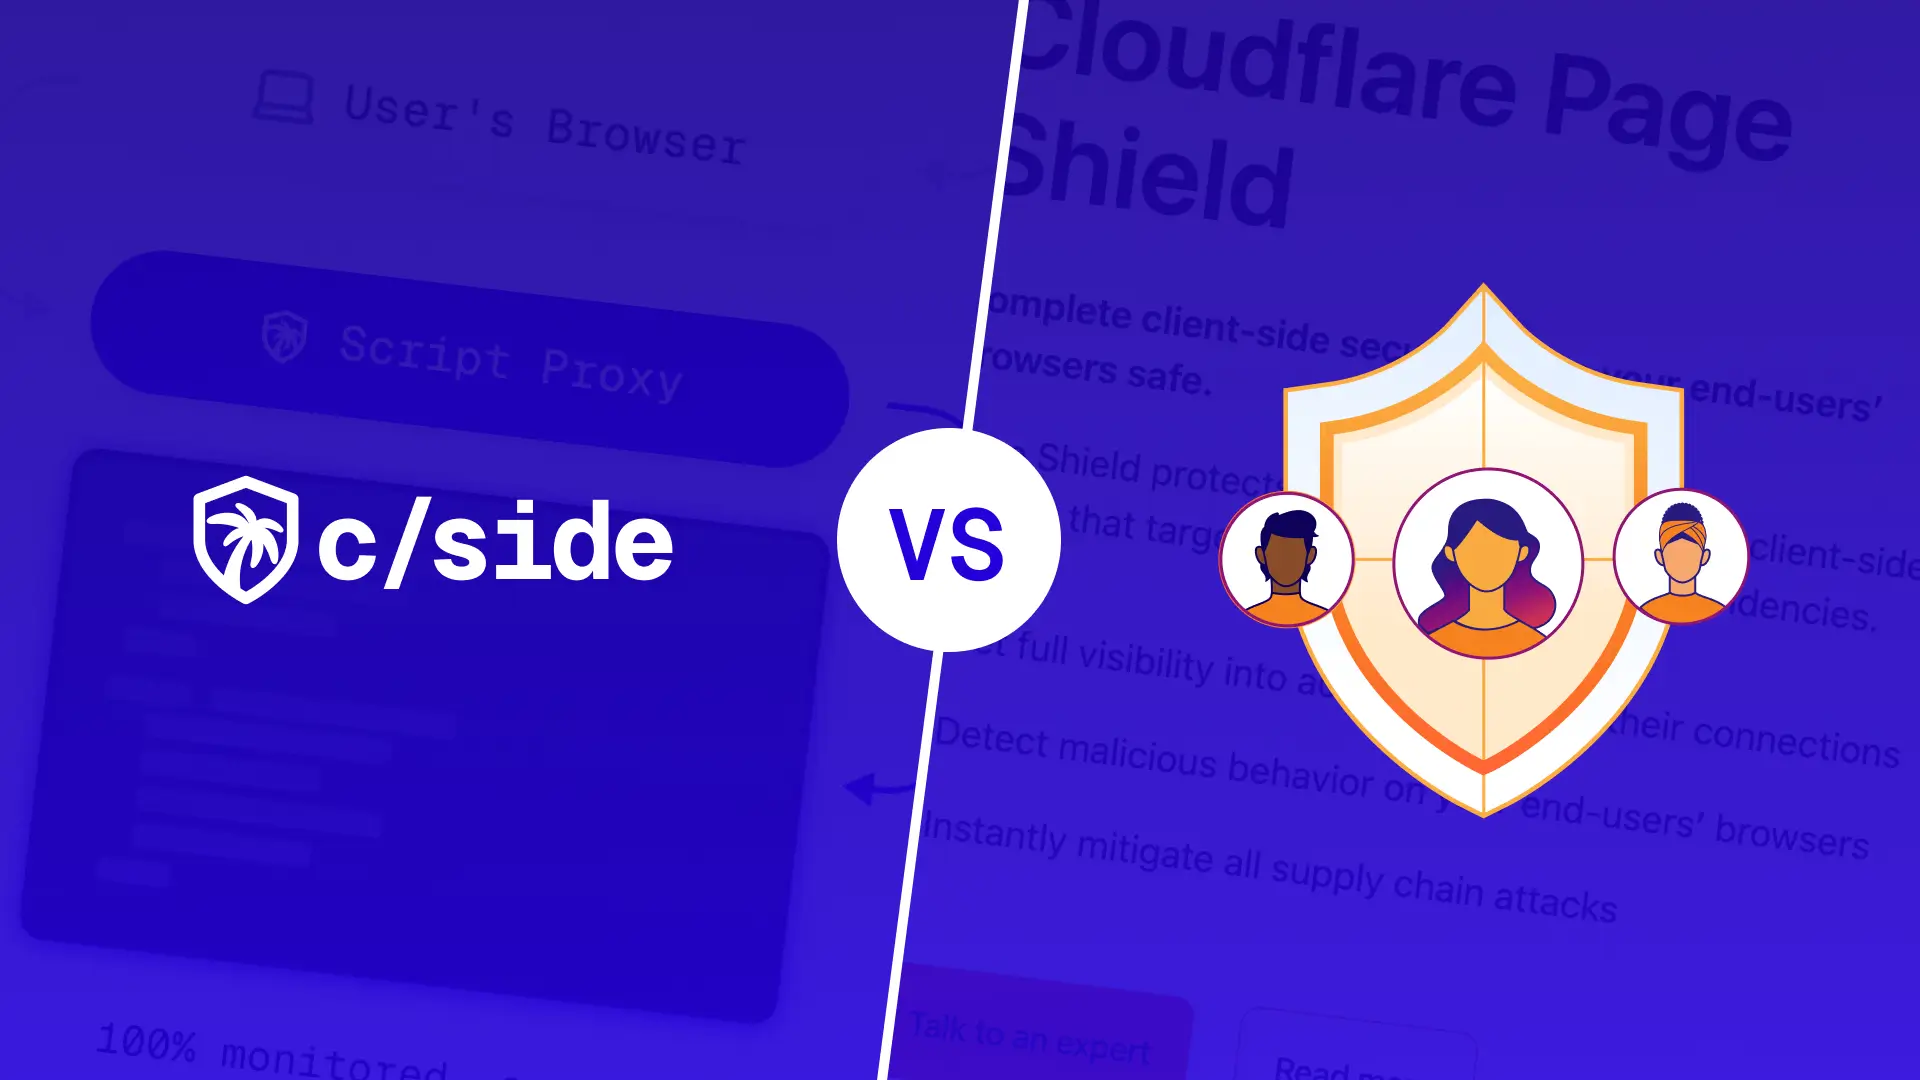 The logo of c/side and the logo of Cloudflare Page Shield